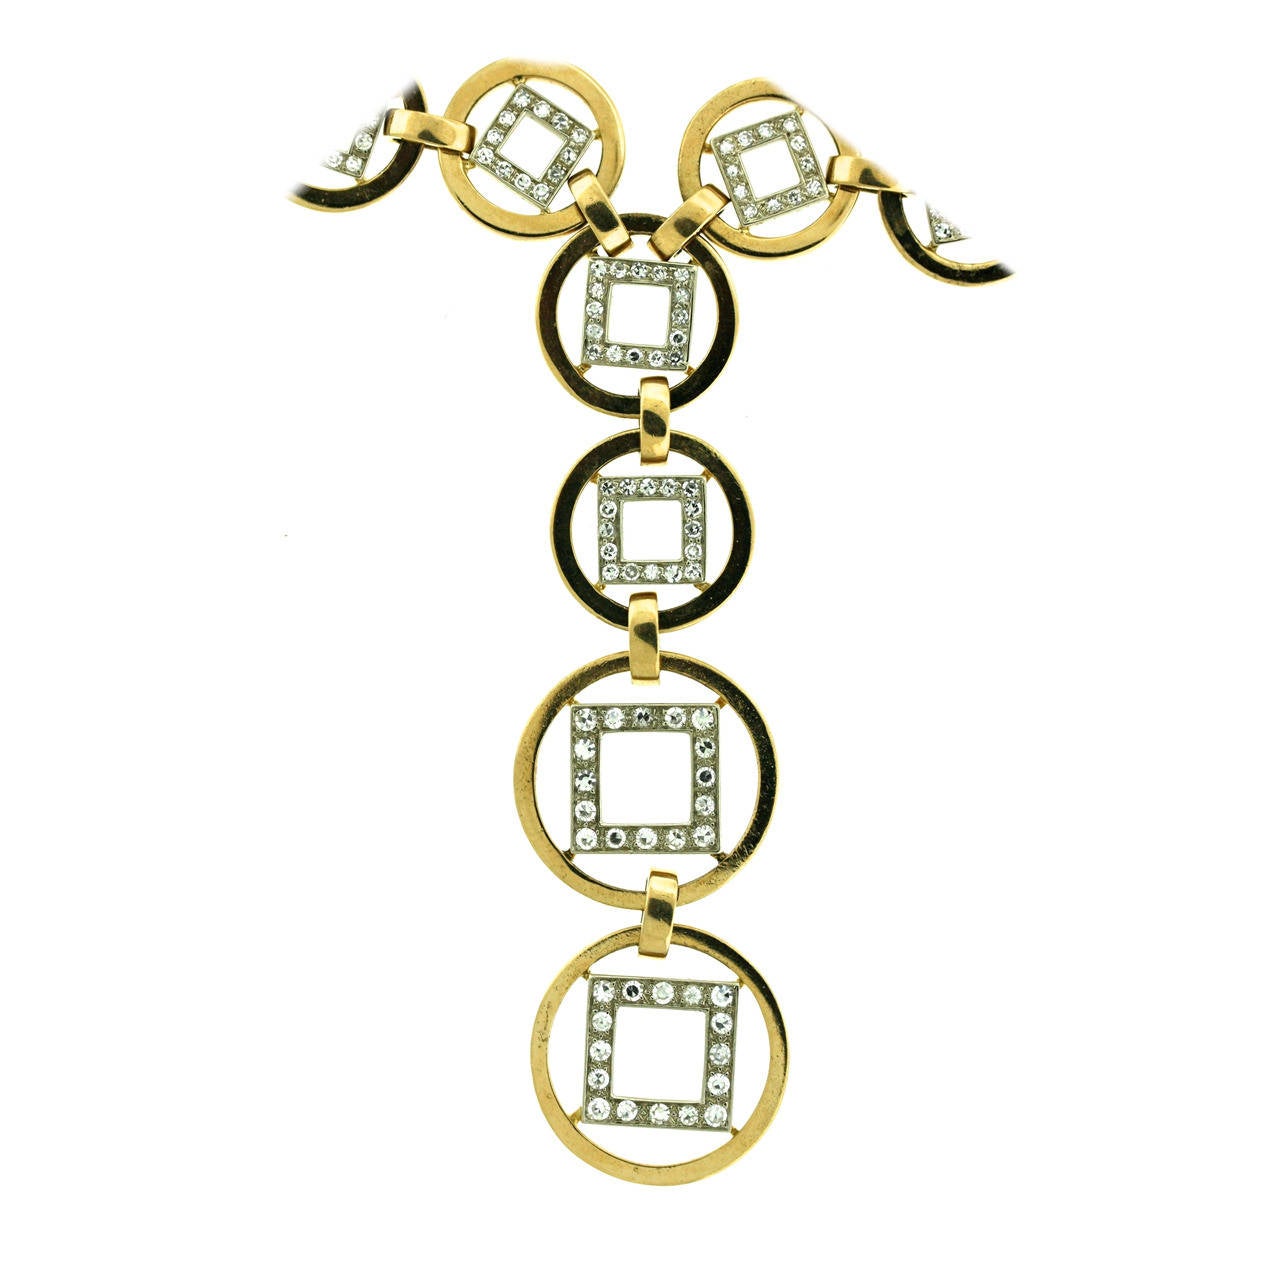 Faraone 1970s18k polished gold and diamond sautoir designed as a series of circular links each centering an interior white gold diamond set square. Each link rotates independently so that the diamond squares tilt at will and shift periodically